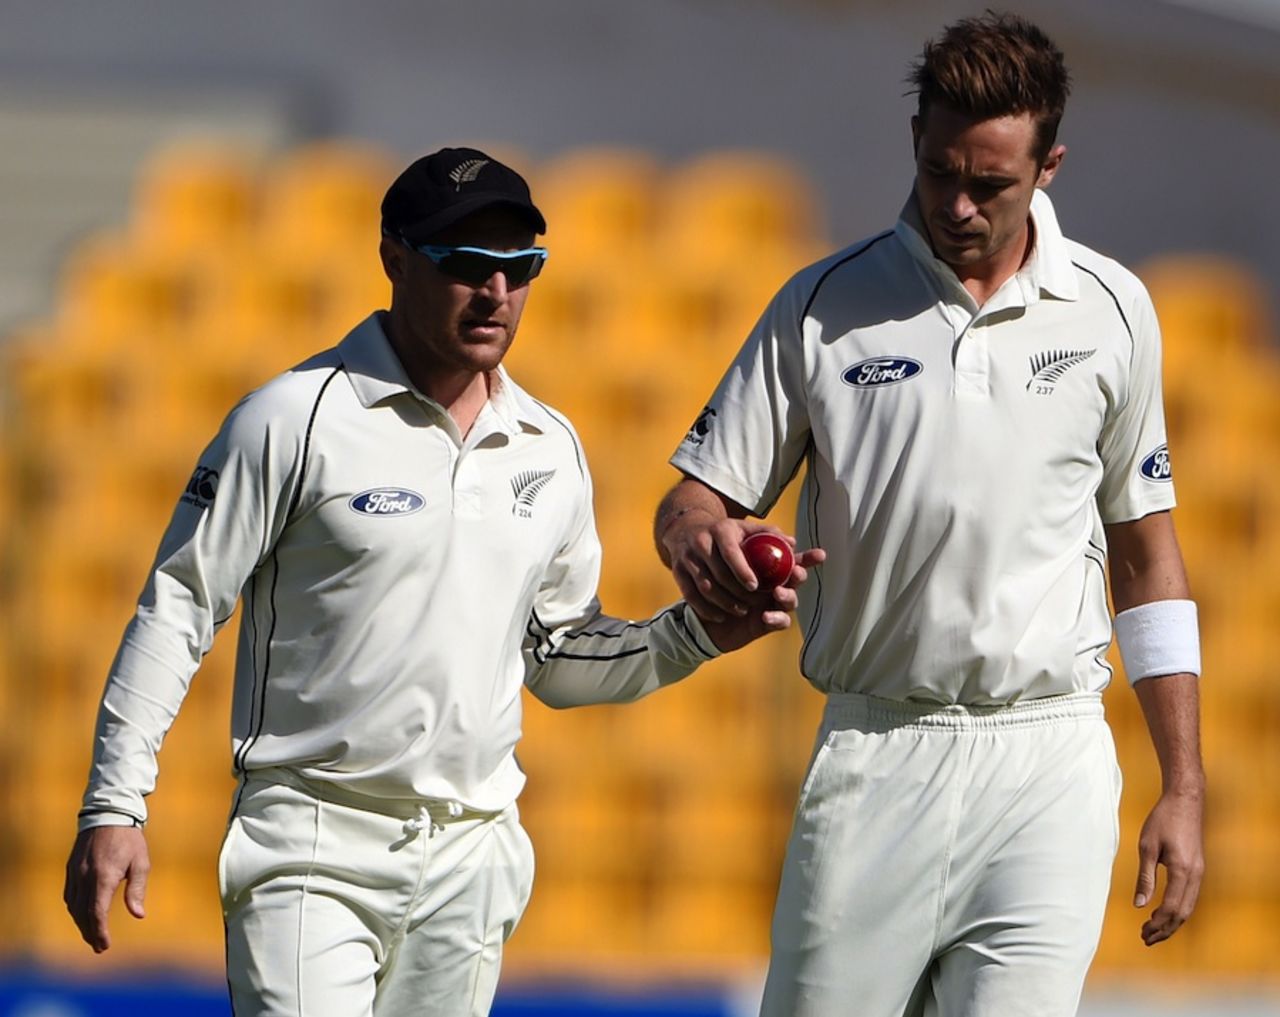 Brendon McCullum gives Tim Southee the new ball, Pakistan v New Zealand, 1st Test, Abu Dhabi, 1st day, November 9, 2014